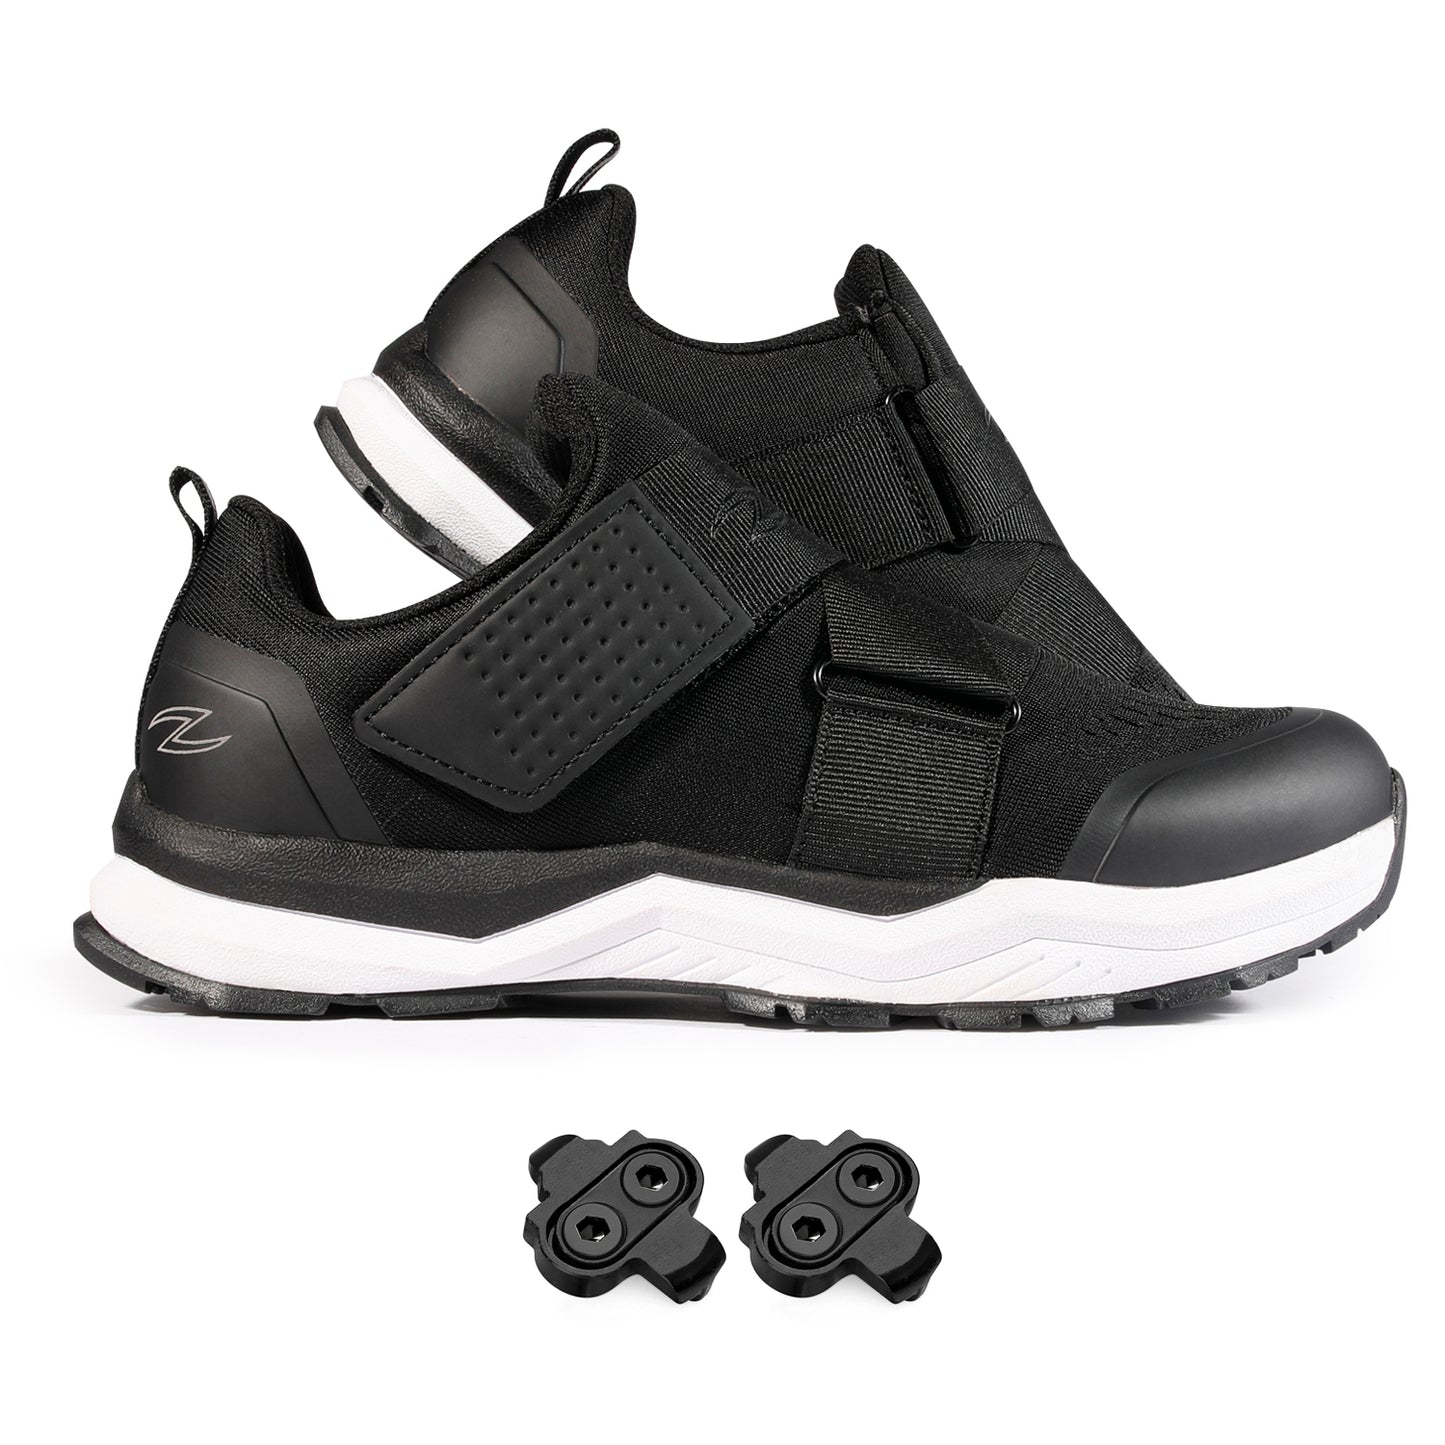 Zol Salon Indoor Fitness and Urban Cycling Shoes with Spd Cleats - Zol Cycling